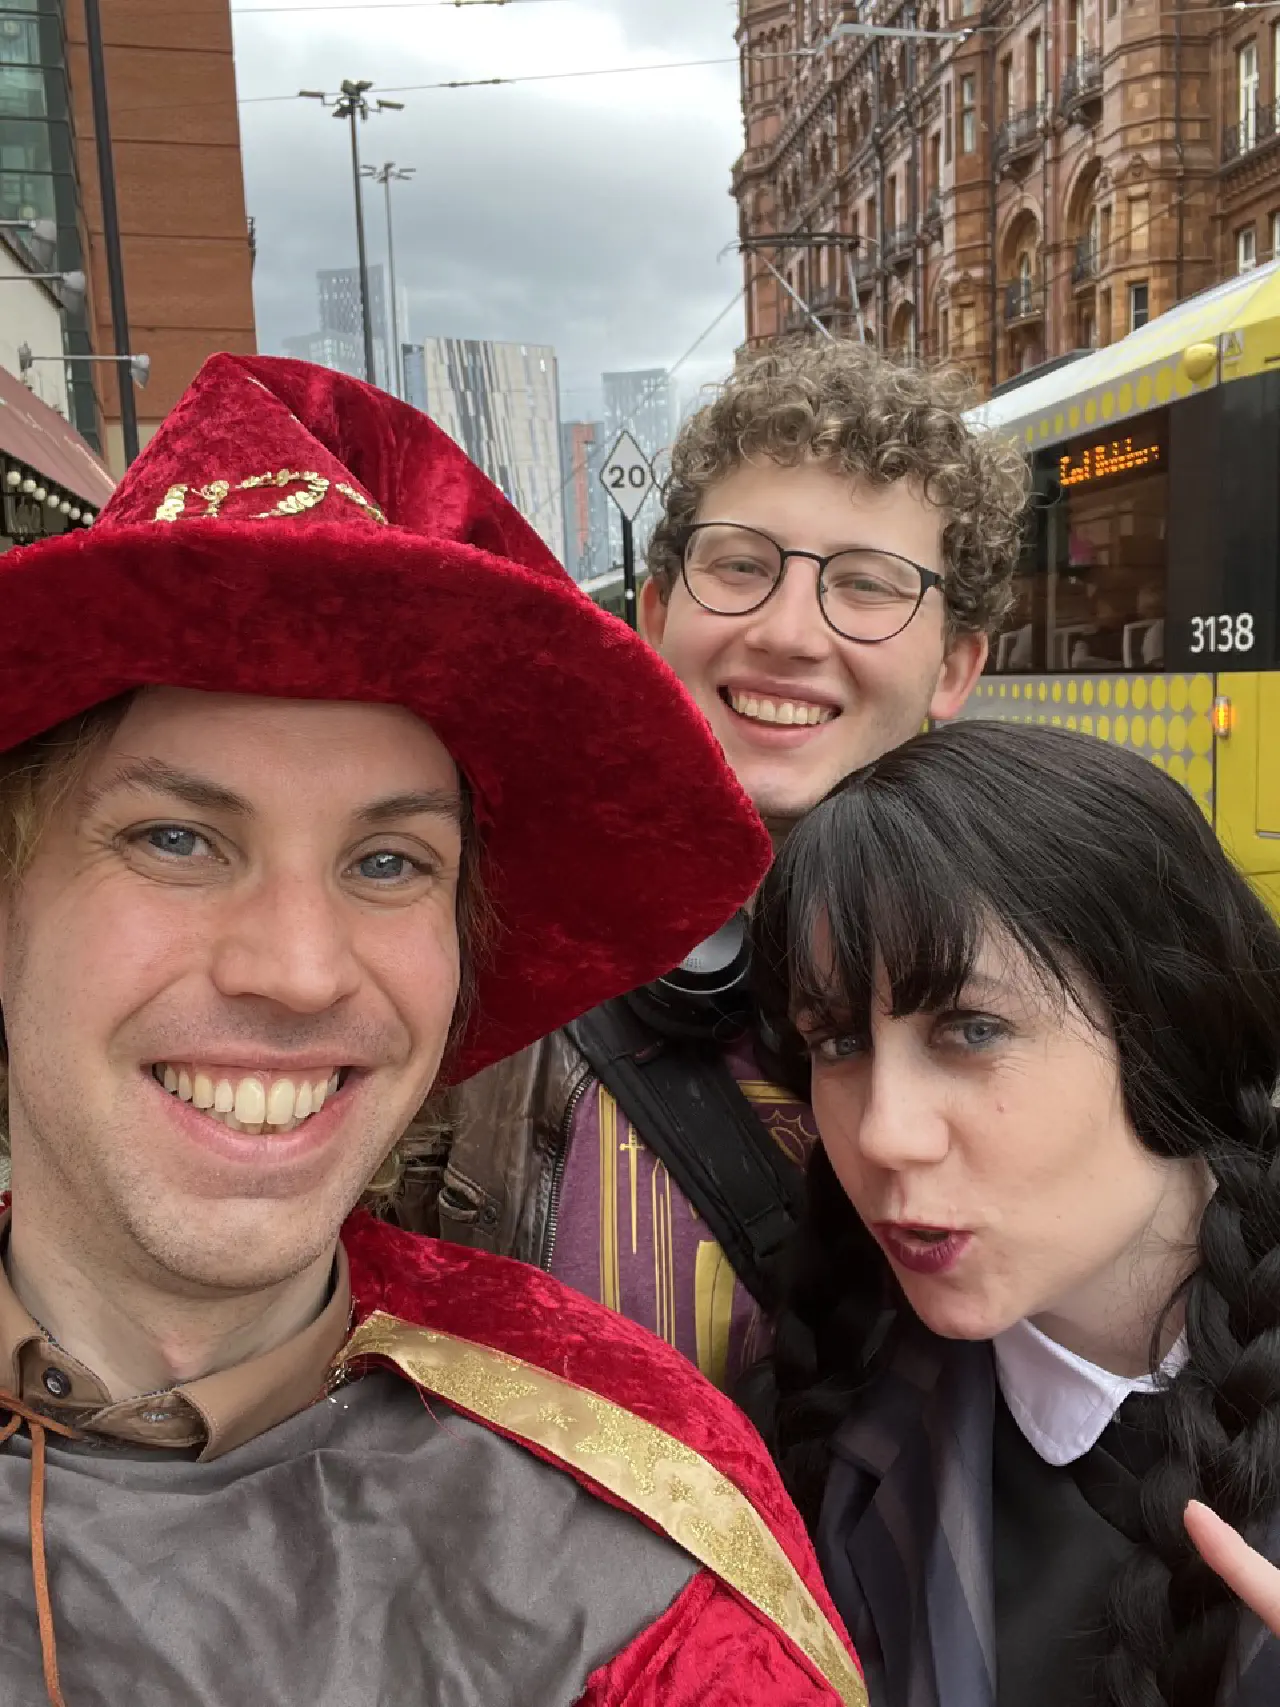 Selfie of us all, Rincewind, Wednesday and Nate not in costume. A tram has photobombed us in the background.